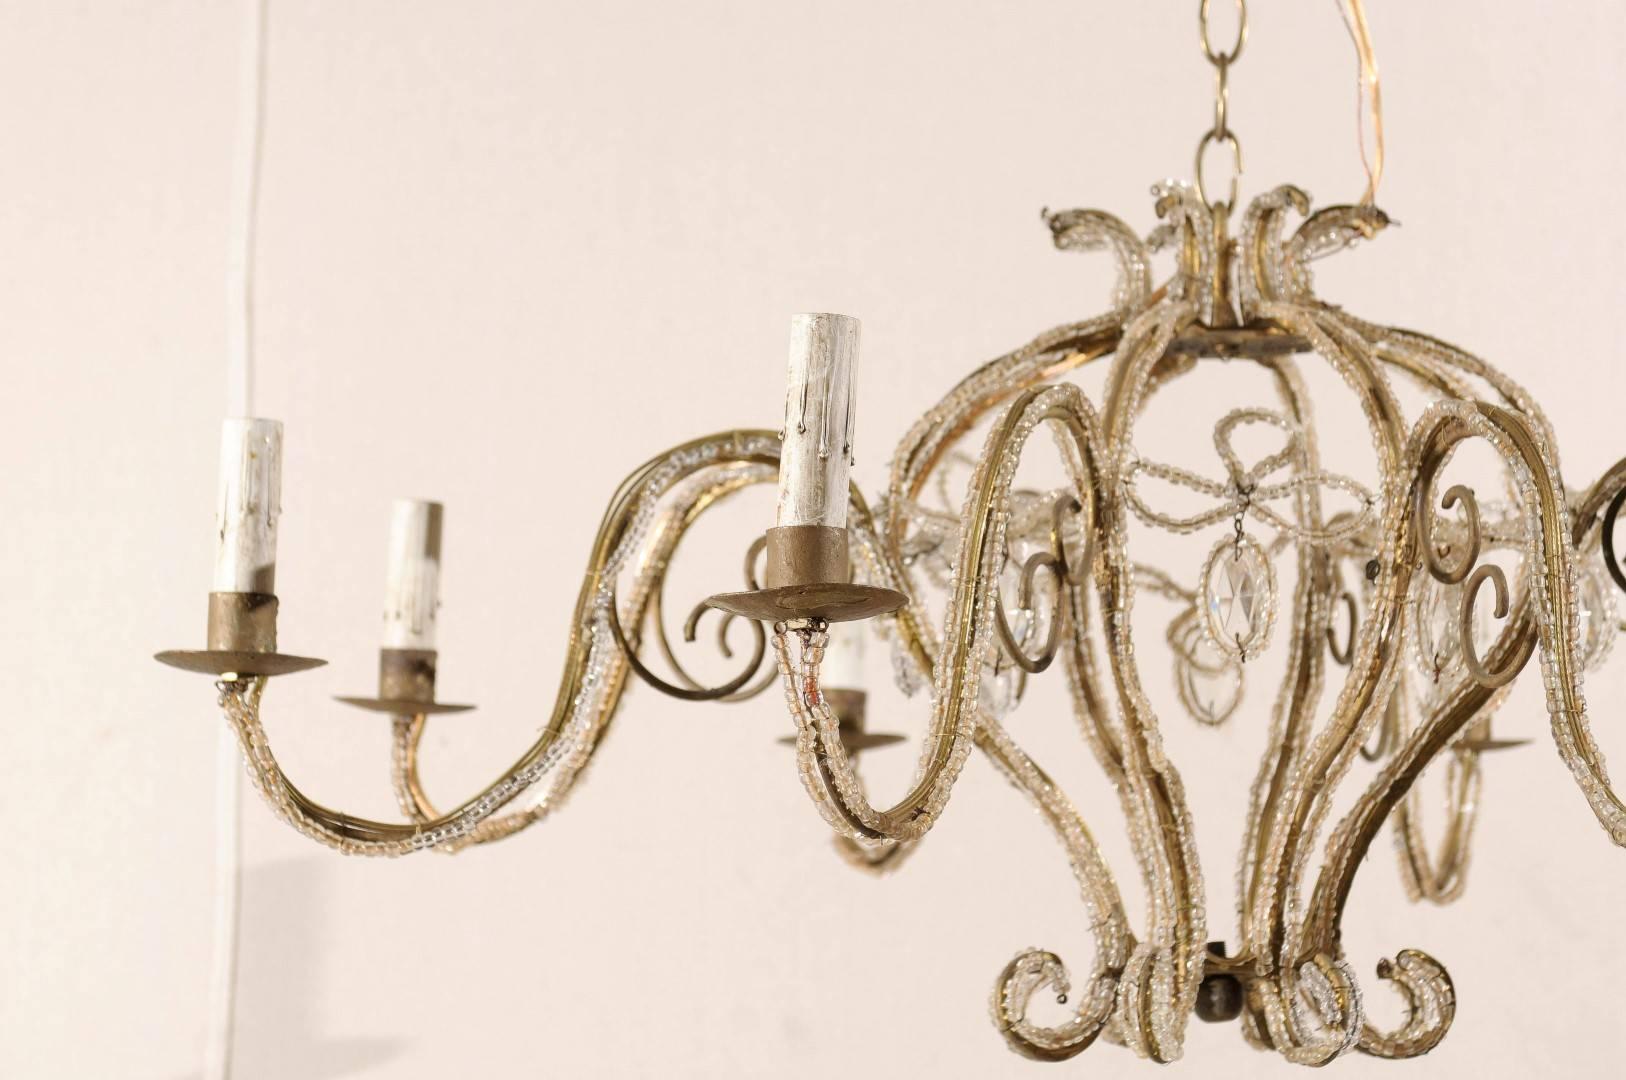 20th Century Curling Italian Eight-Light Chandelier with Gilding, Beading and S-Scrolls